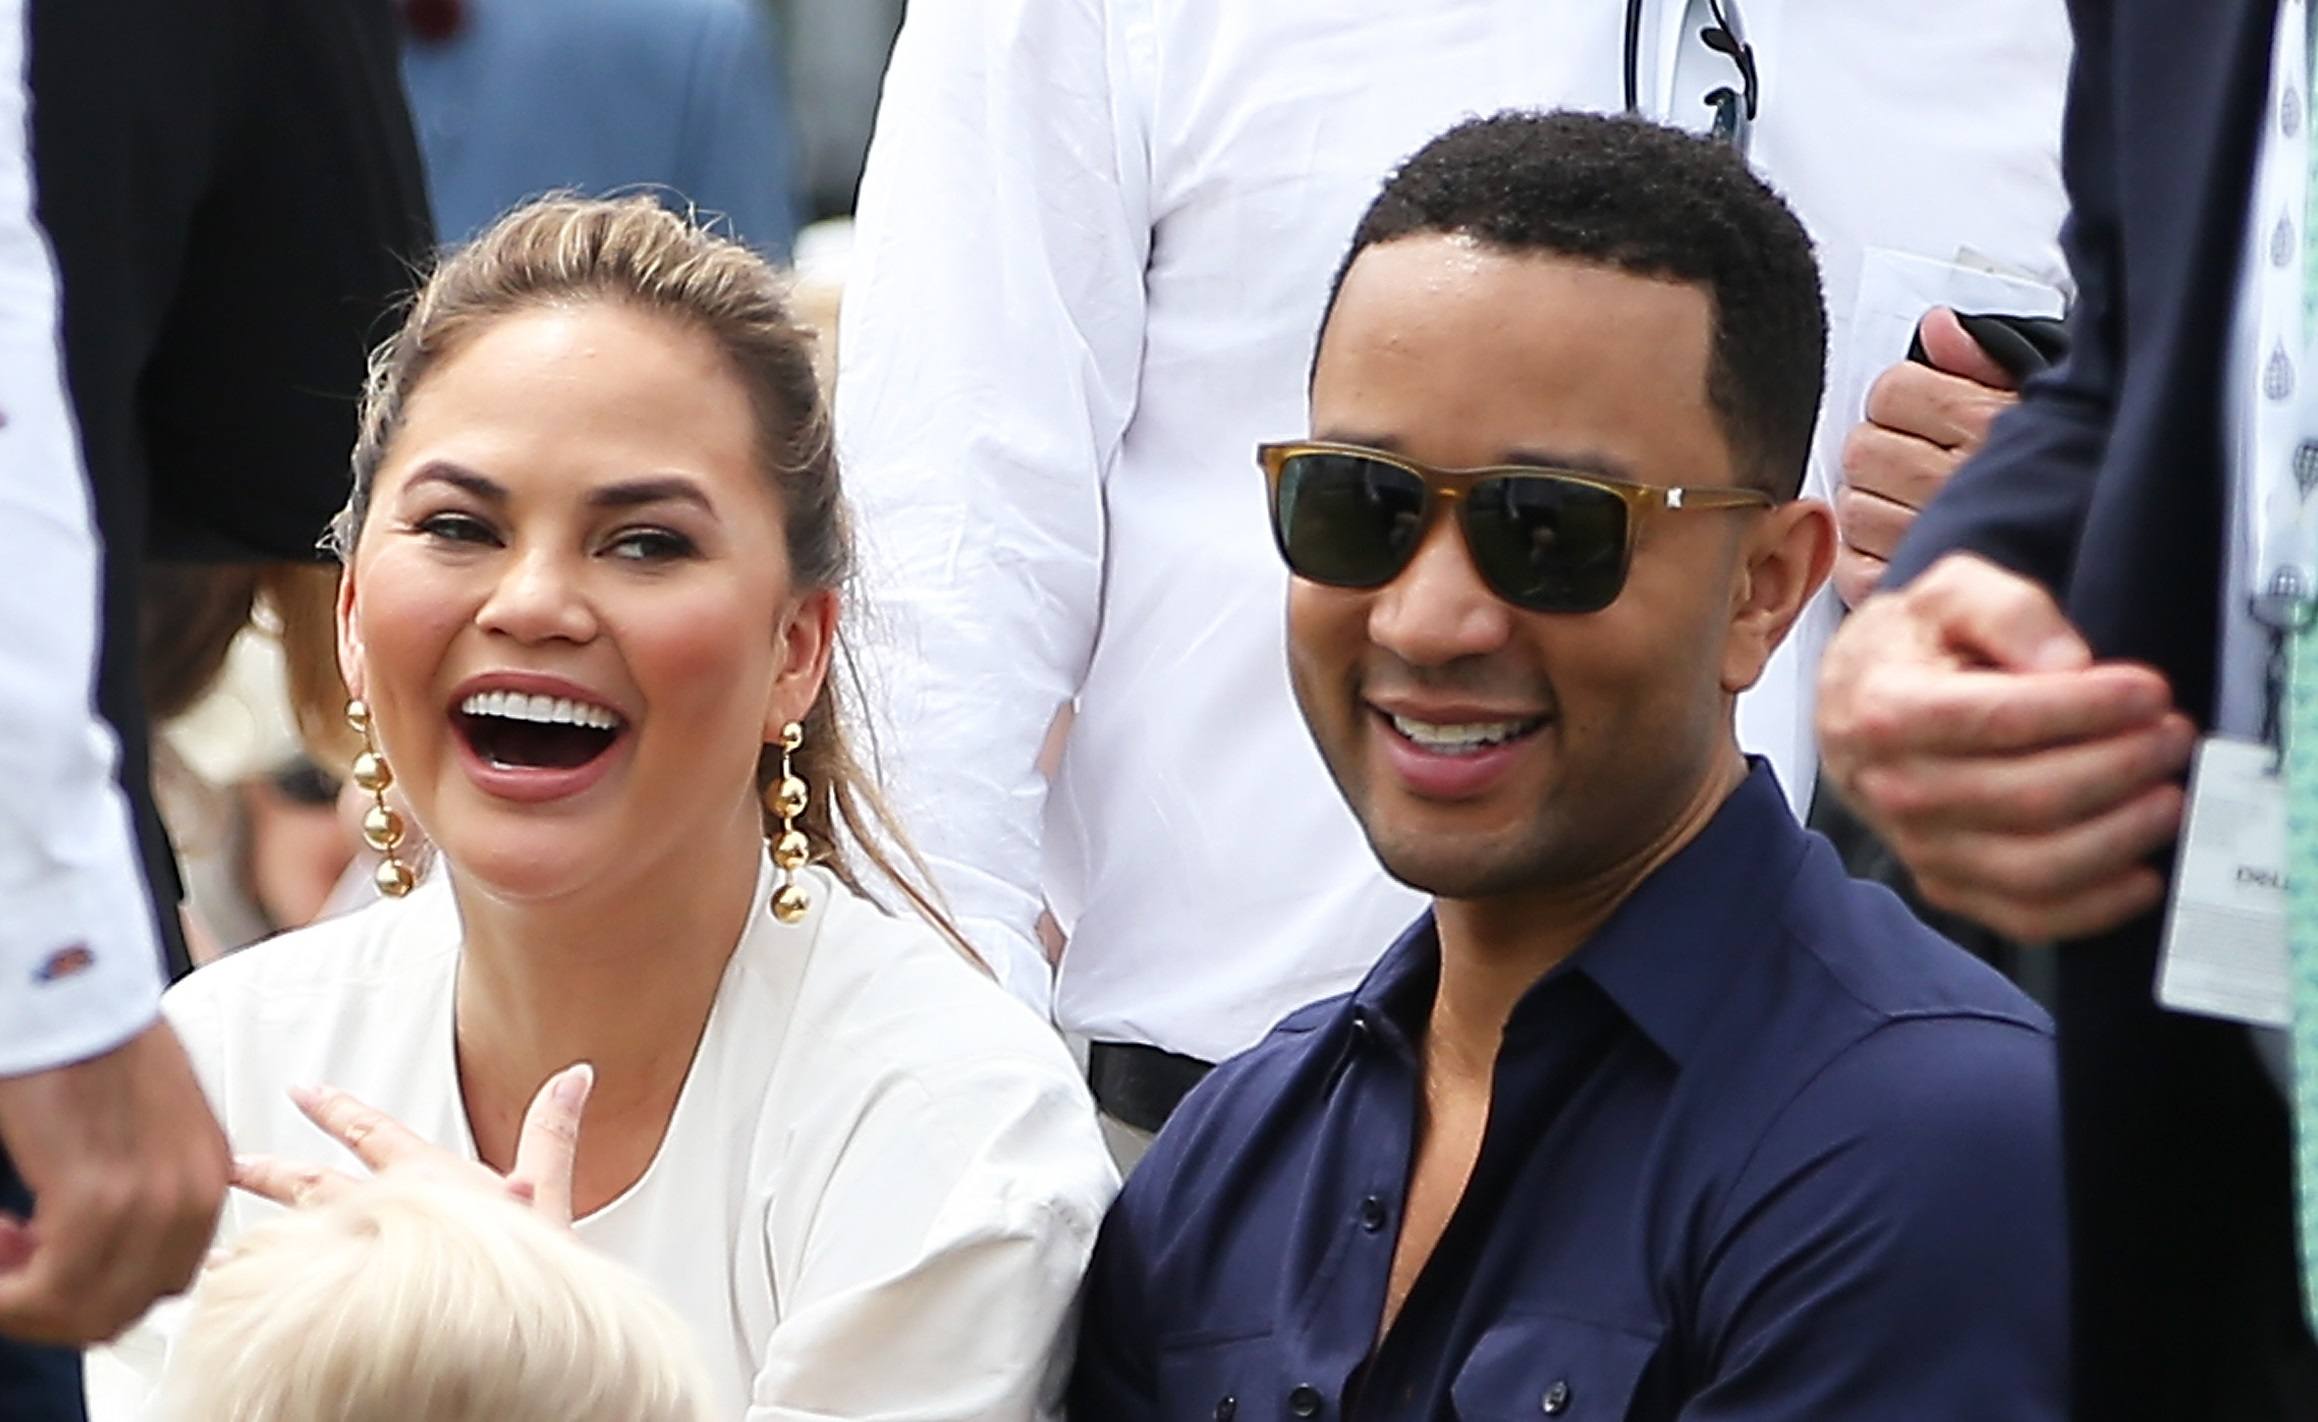 John Legend and Chrissy Teigen look on during the Tennis Hall of Fame induction ceremonies at the International Tennis Hall of Fame on July 22, 2017 in Newport, Rhode Island. 